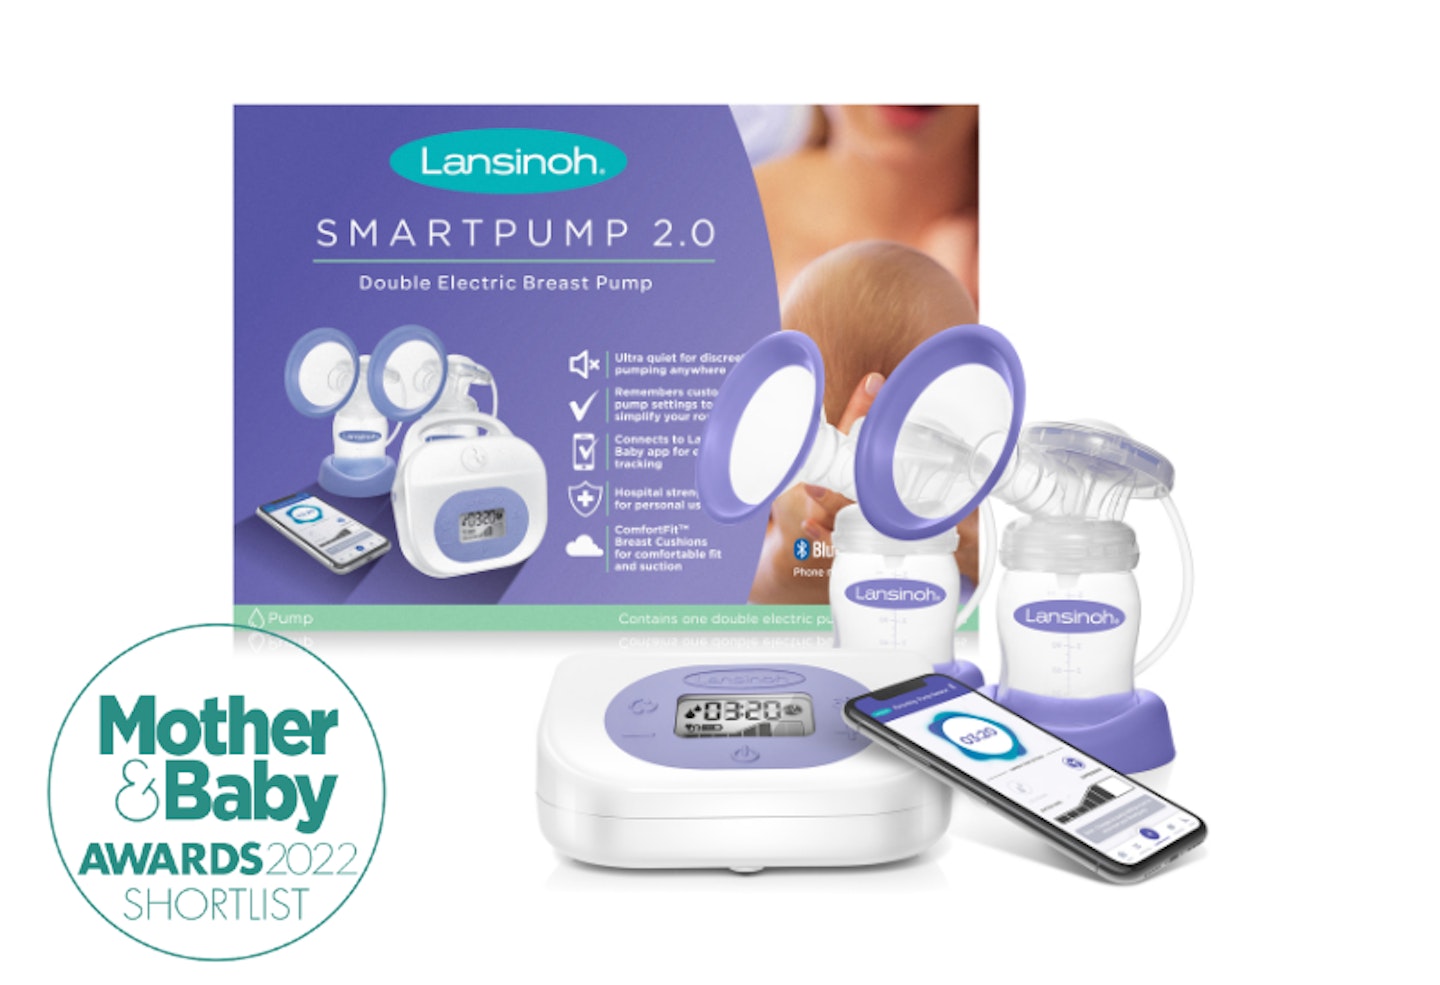 A new mom reviews two smart breast pumps